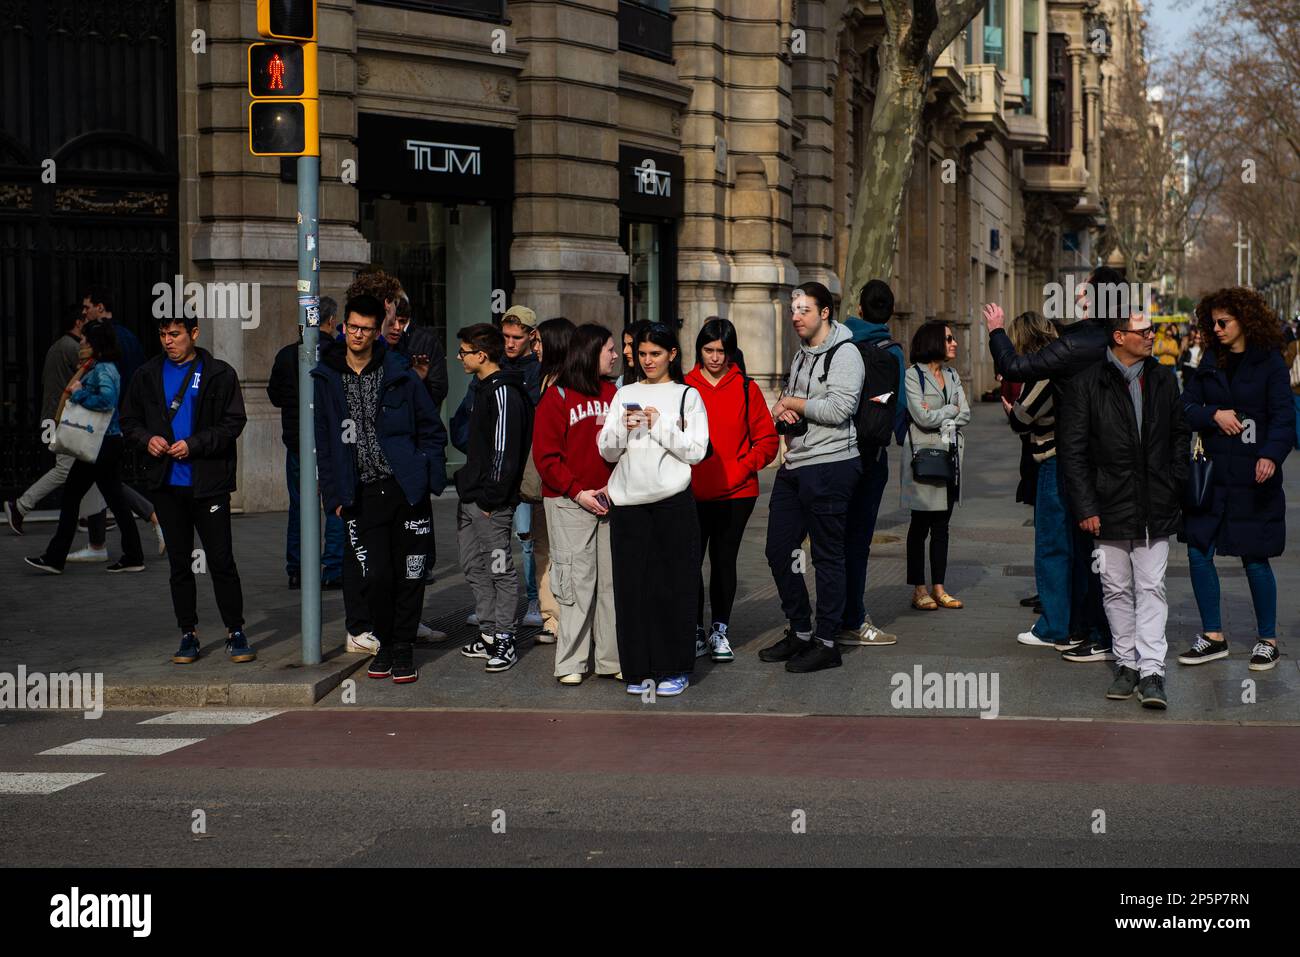 Barcelona,Spain-February 22,2023:Pedestrians wait at a busy street crossing while talking among themselves. Stock Photo